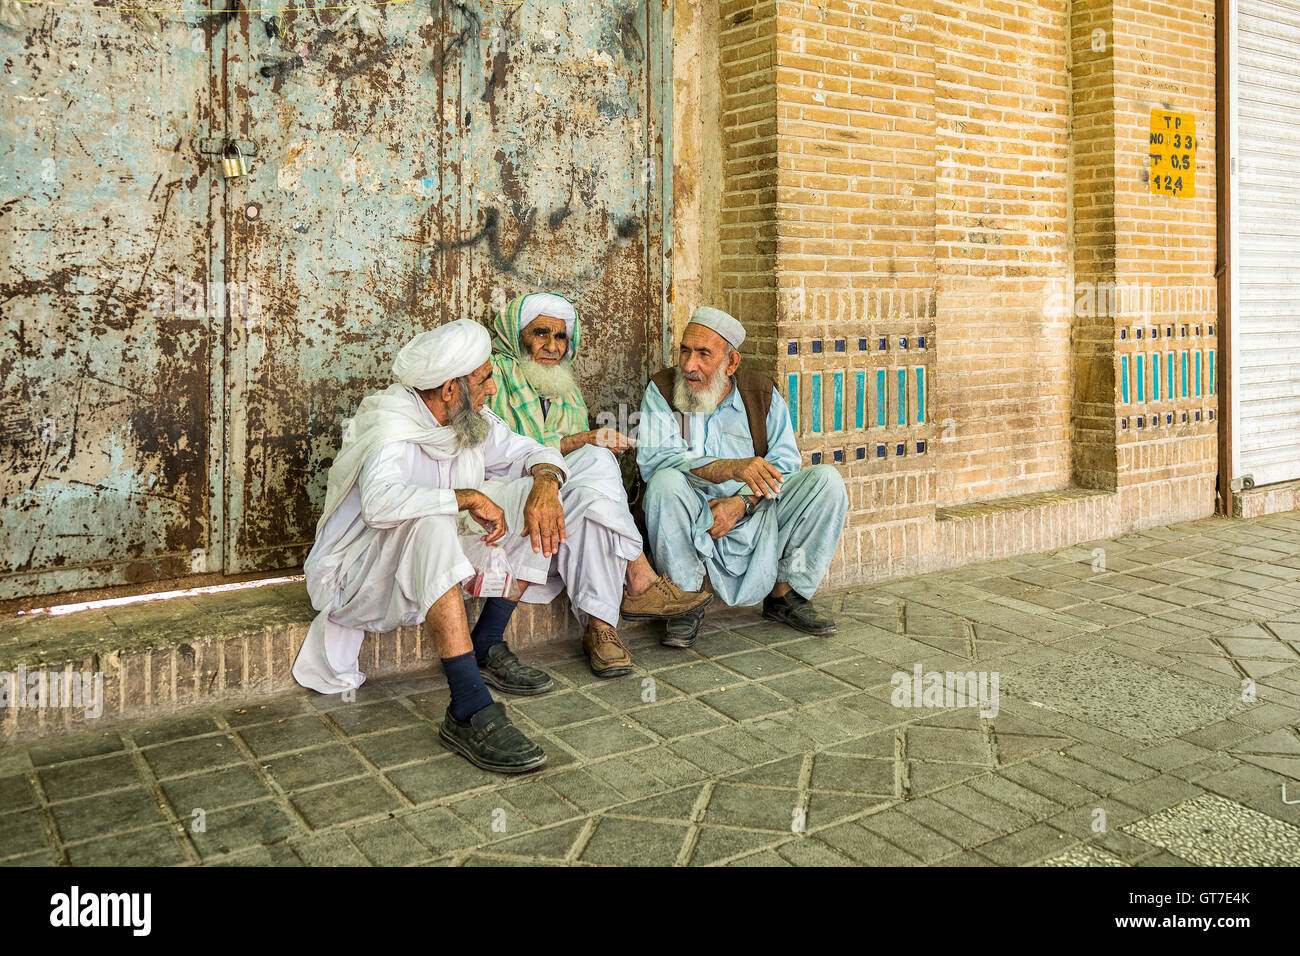 Iranian men wearing robes and turbans sitting on the sidewalk and talking in Yazd, Iran. Stock Photo